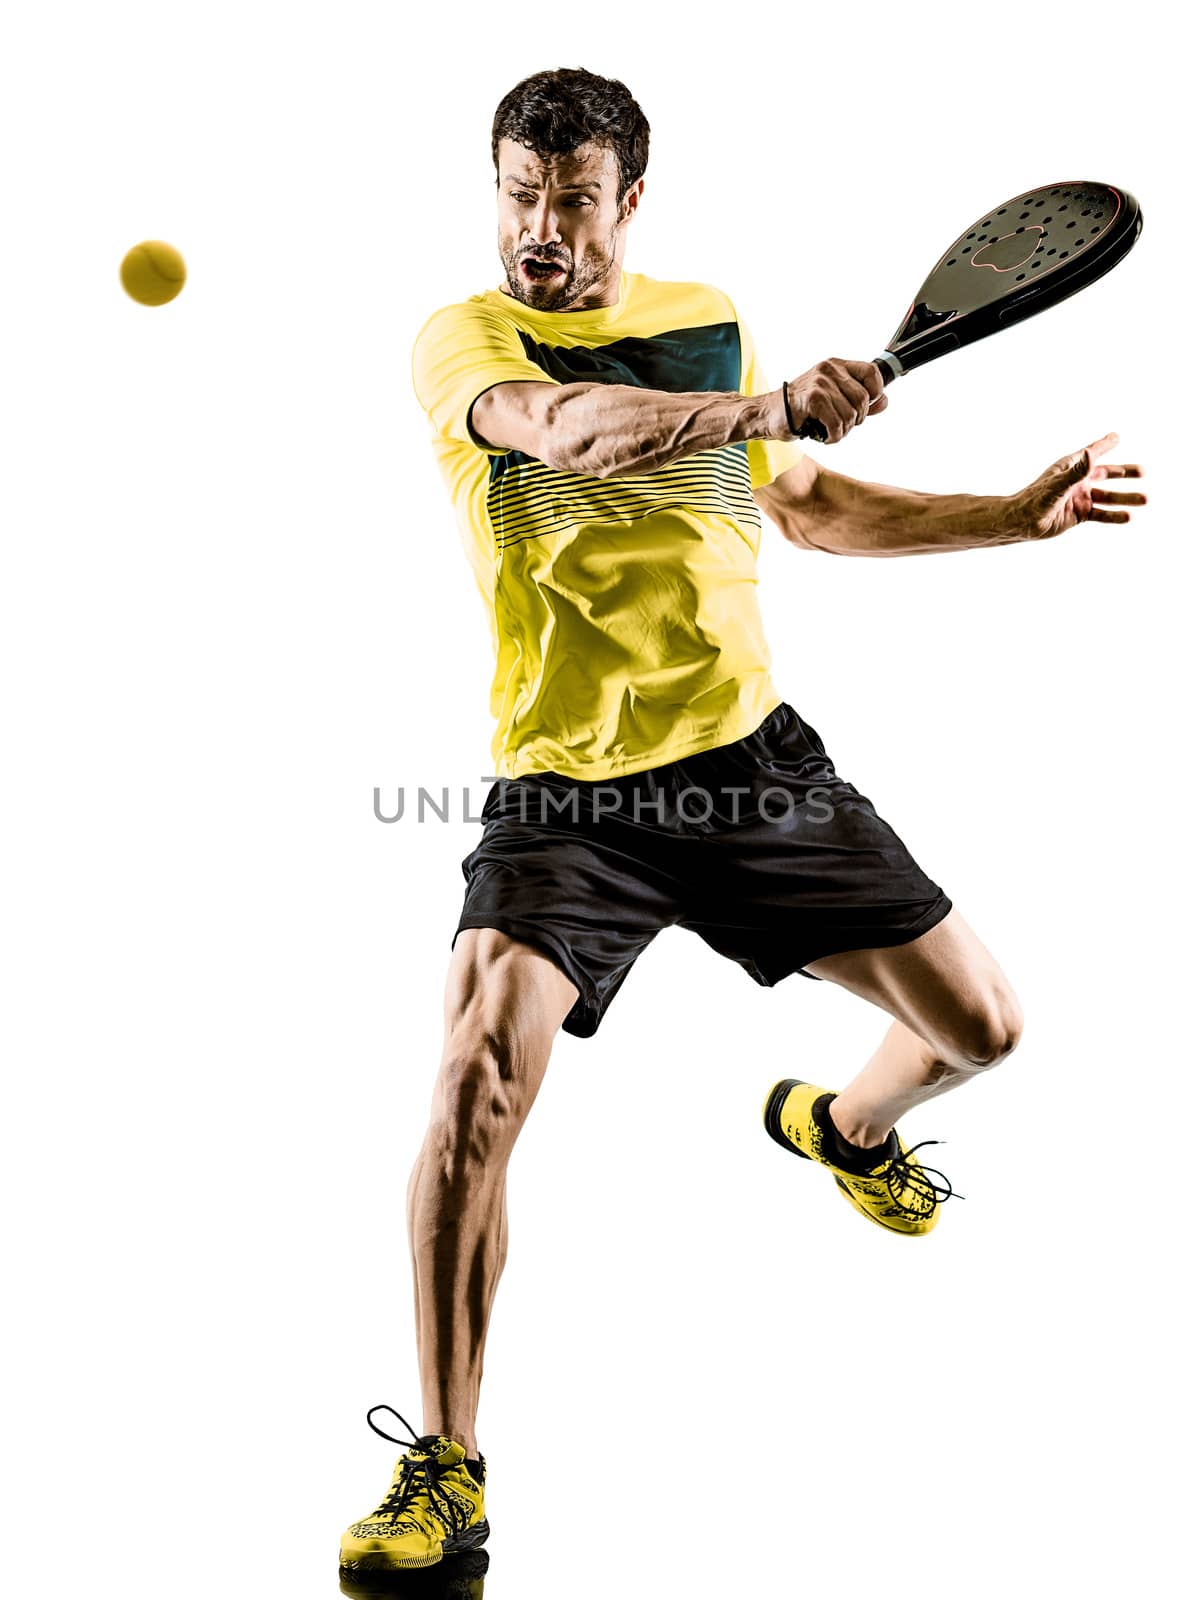 one caucasian man playing PadDLe tennis player isolated on white background